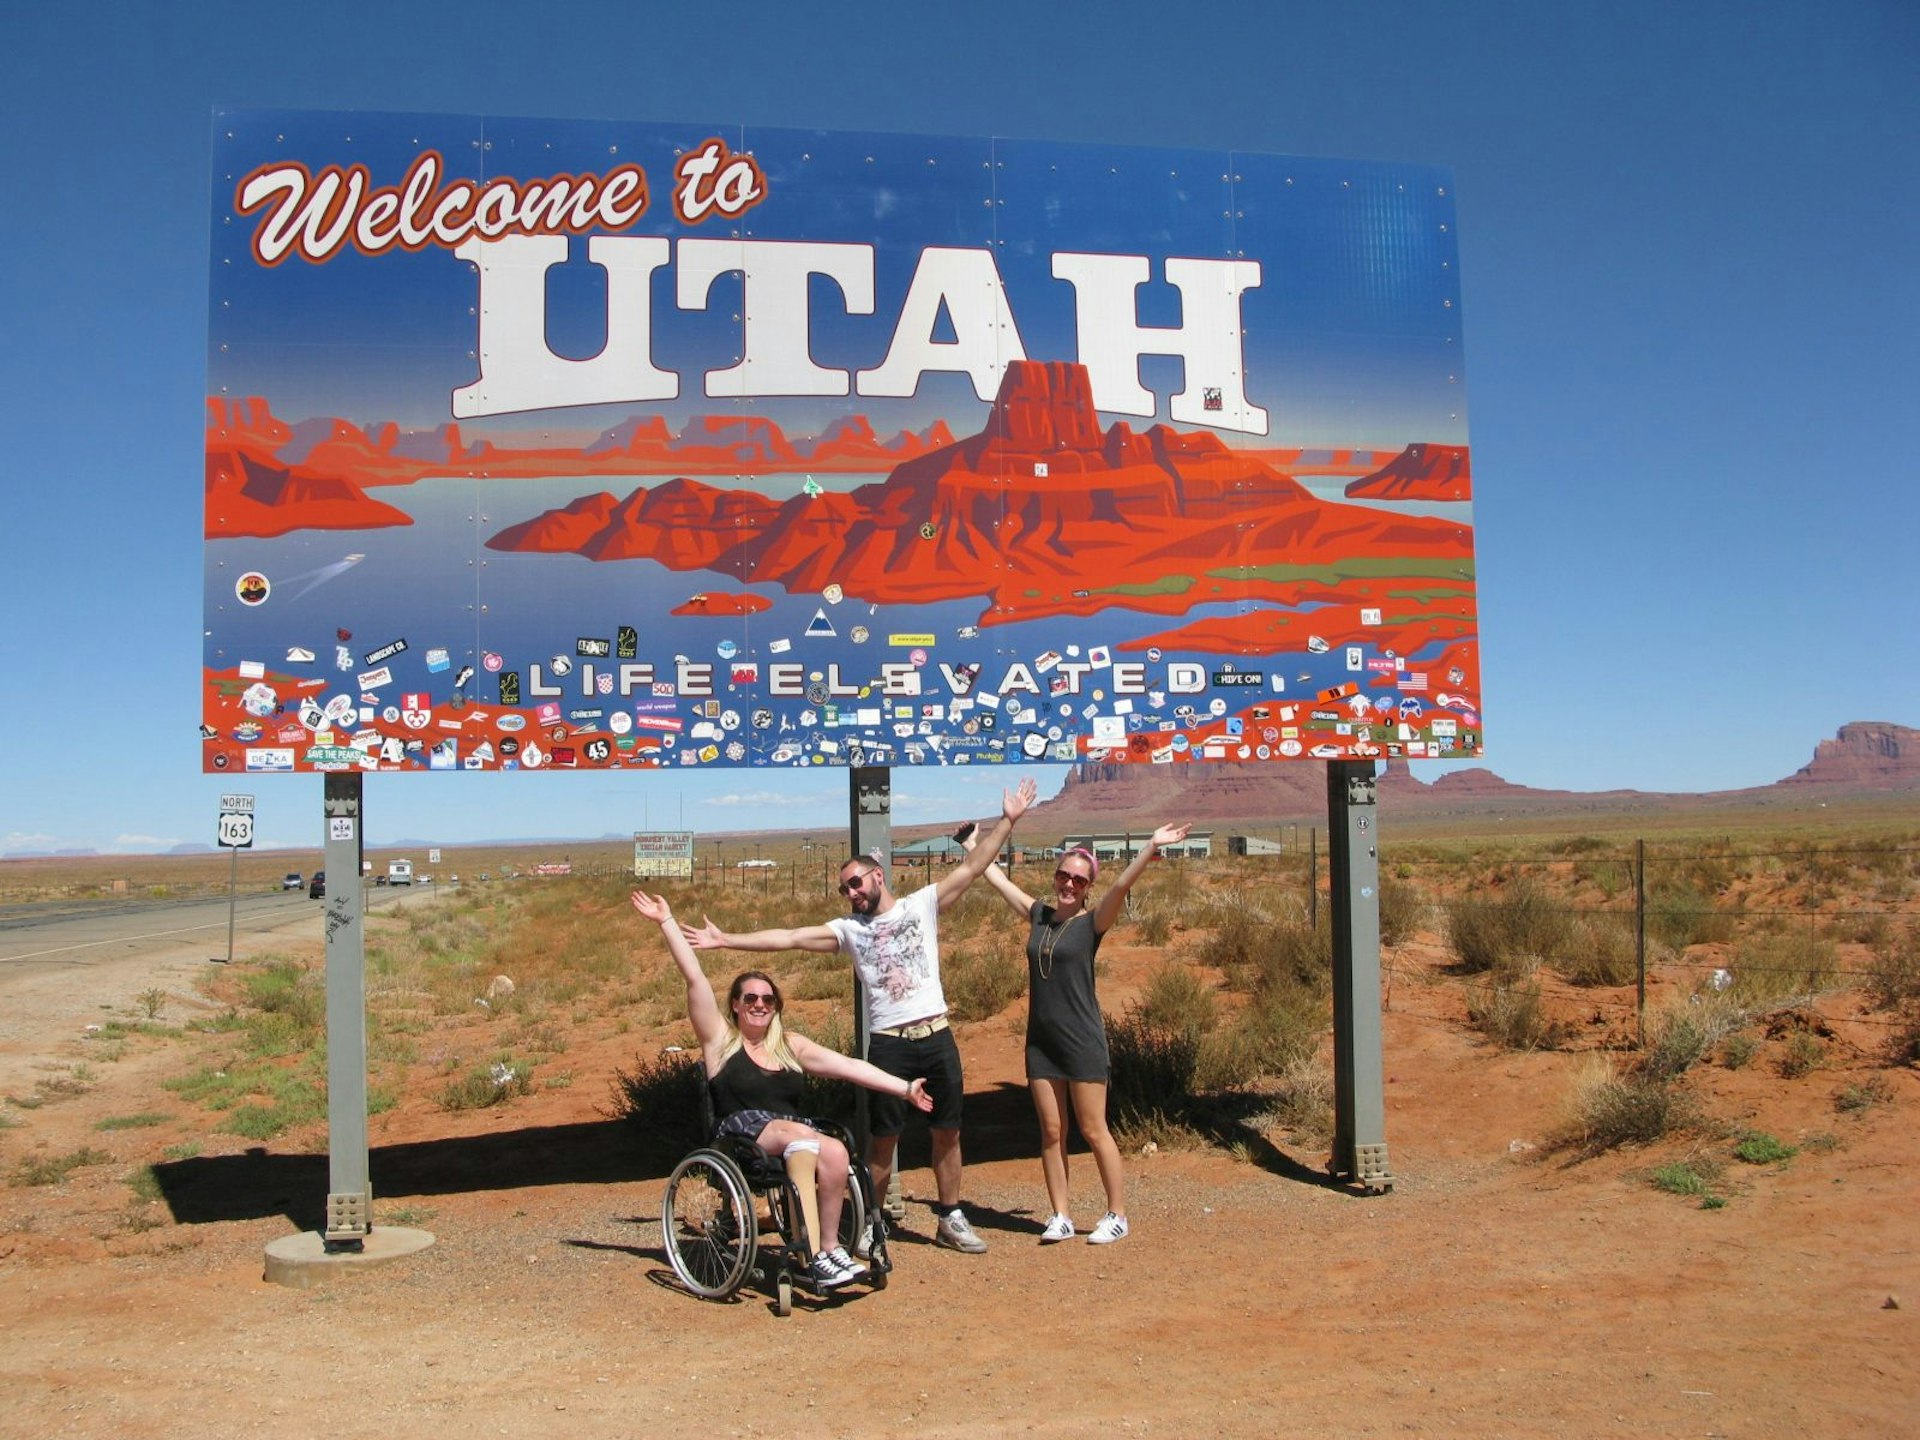 A large 'Welcome to Utah' sign is on the side of a dusty road. Three people, two women and one man, are underneath the sign with their arms outstretched in celebration. The woman on the left is in a wheelchair and the two others are standing next to her.